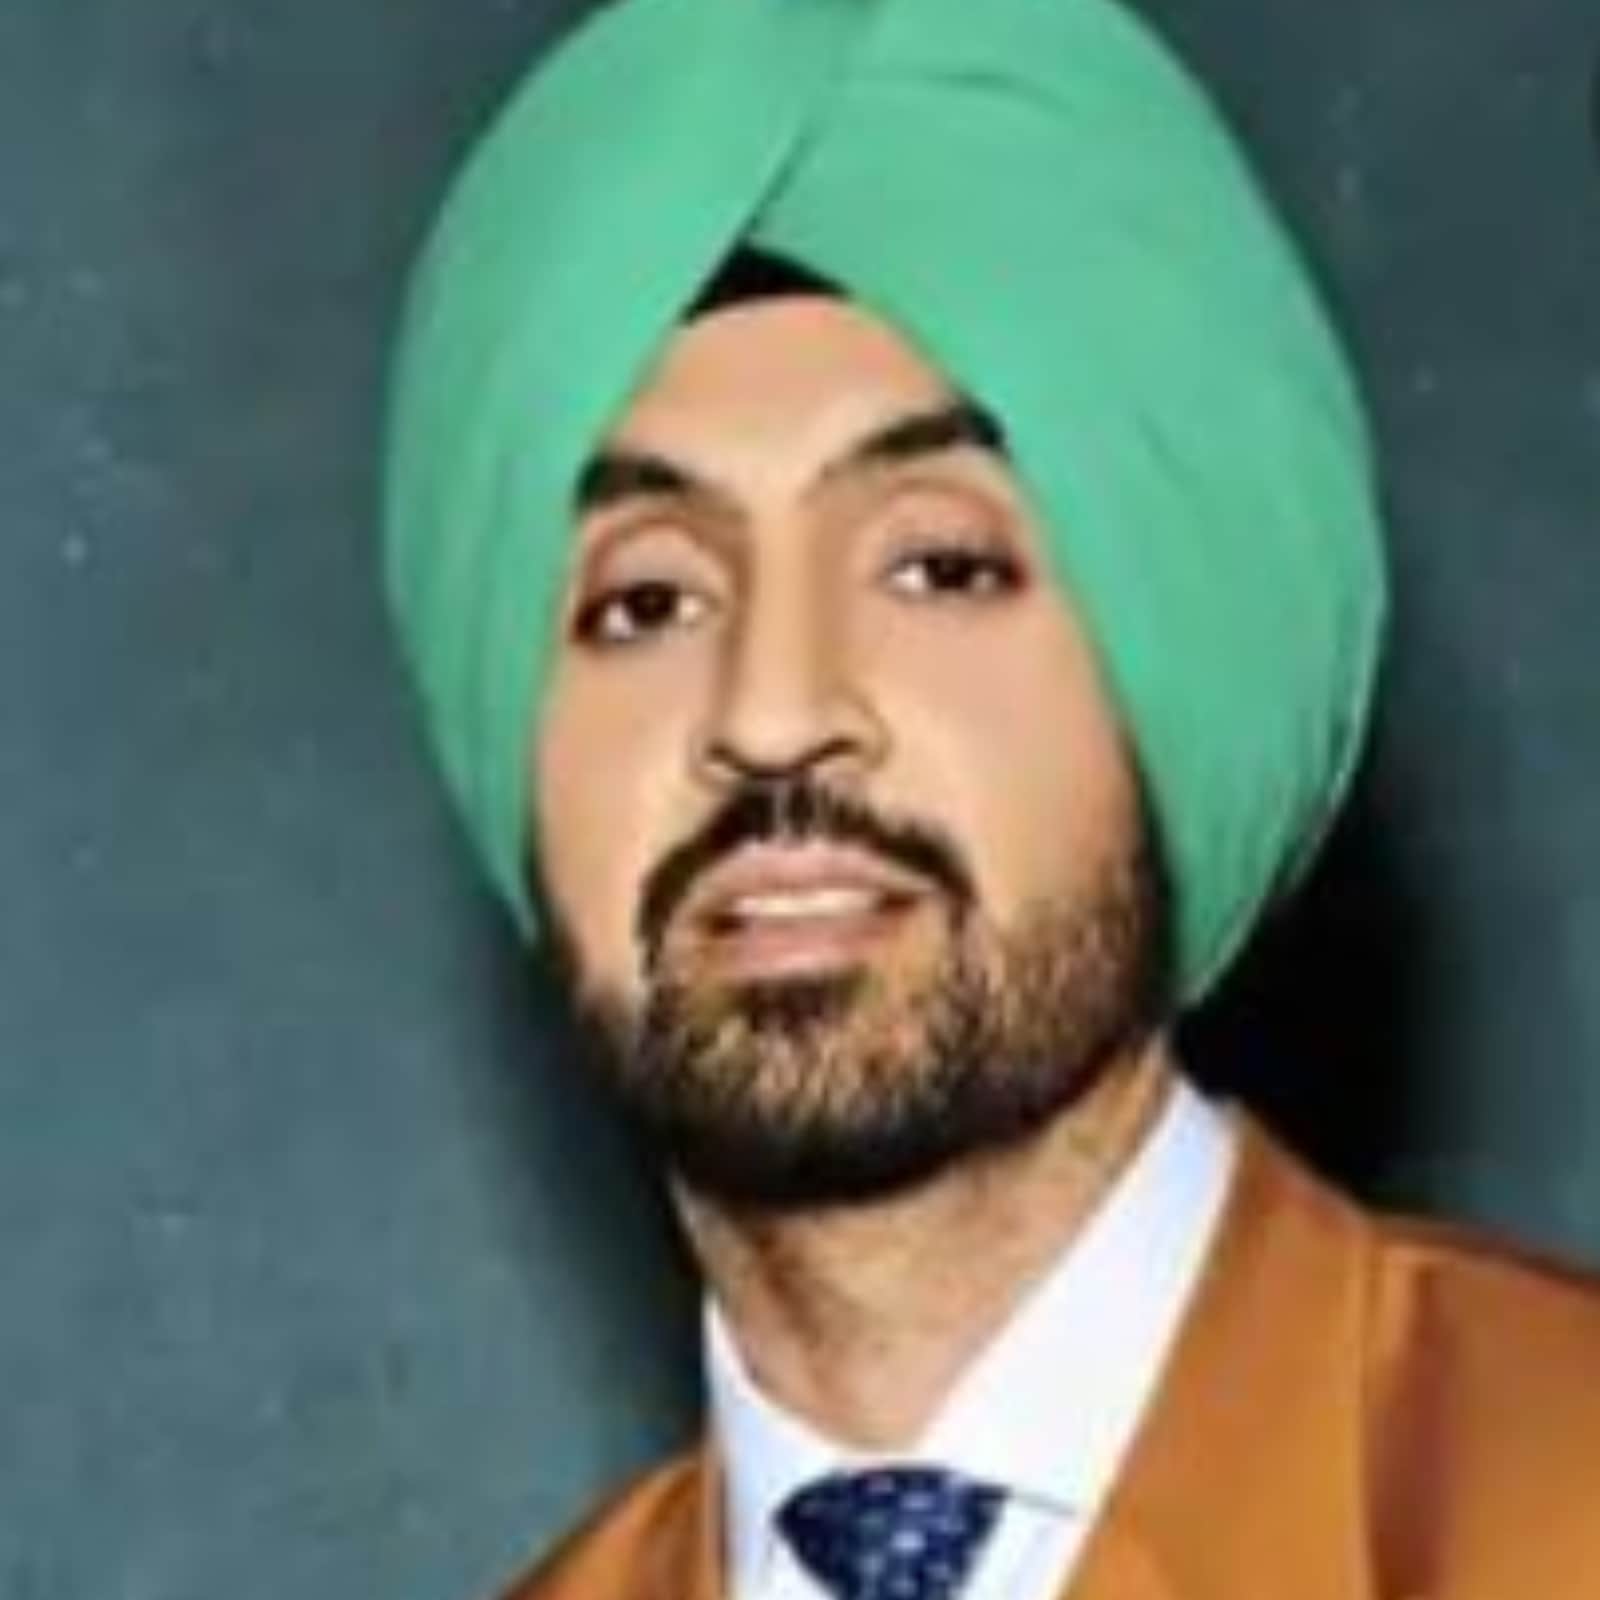 I like exclusive pieces that no one else has: Diljit Dosanjh